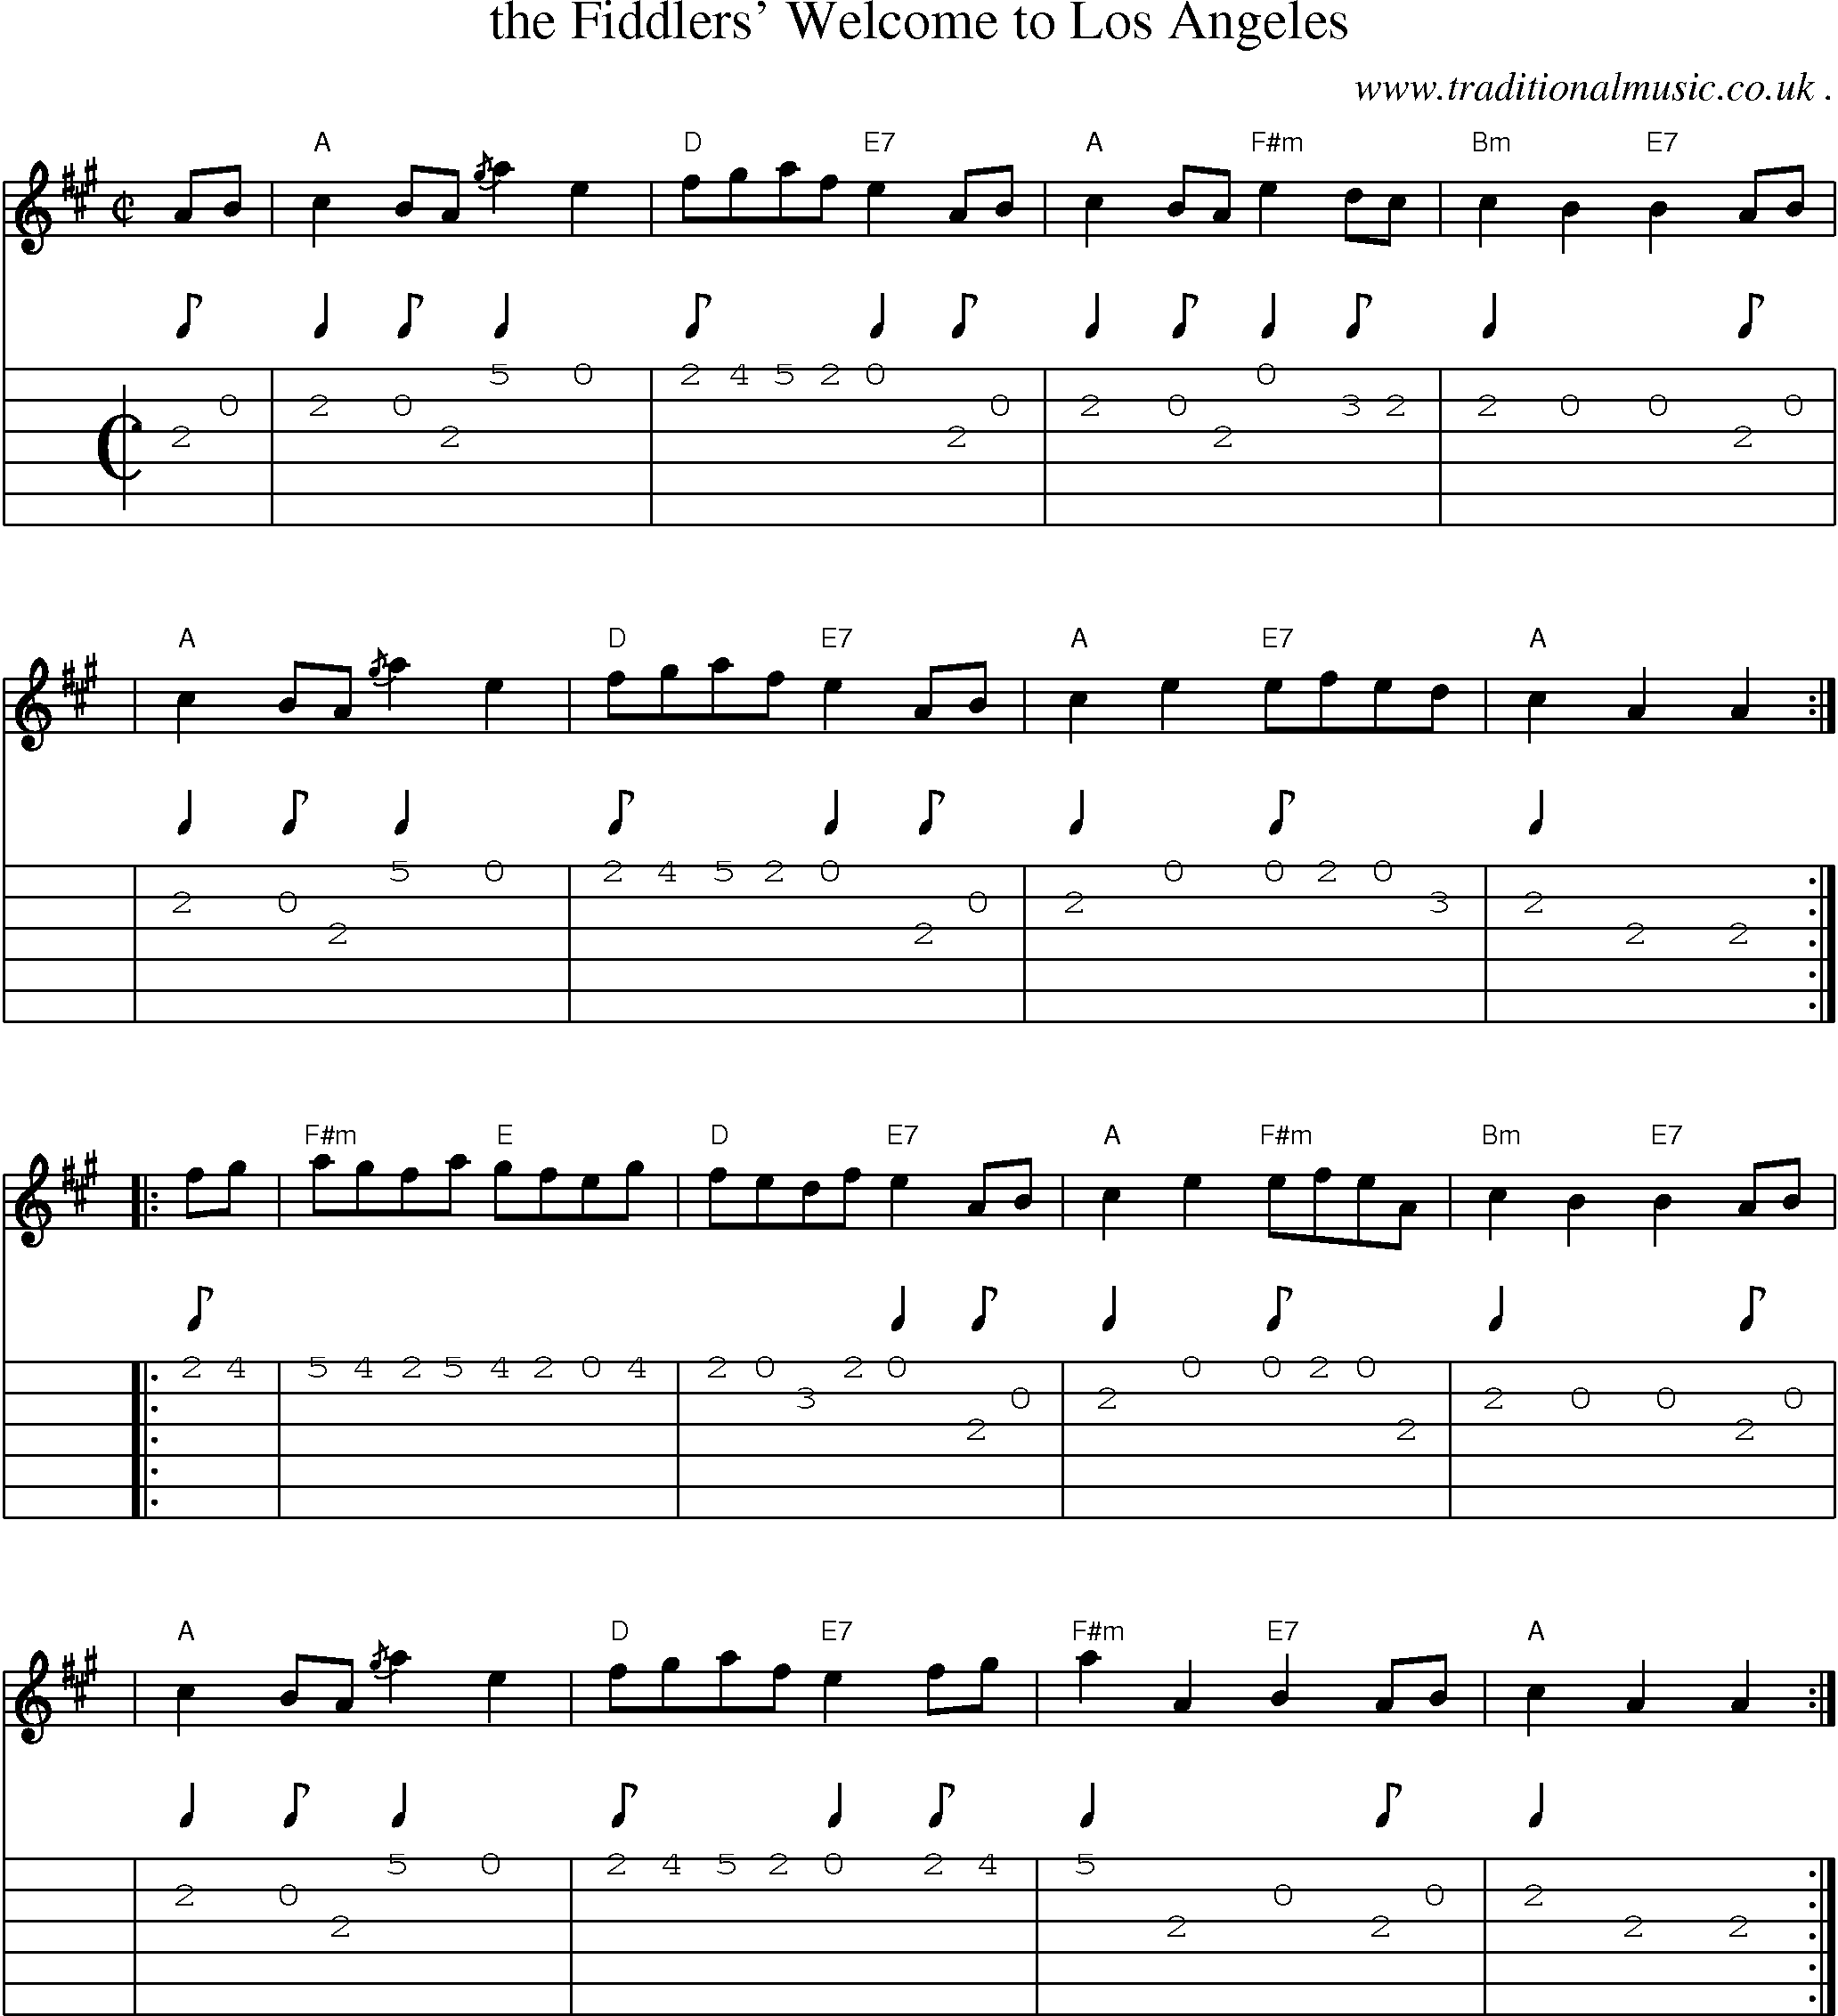 Sheet-music  score, Chords and Guitar Tabs for The Fiddlers Welcome To Los Angeles